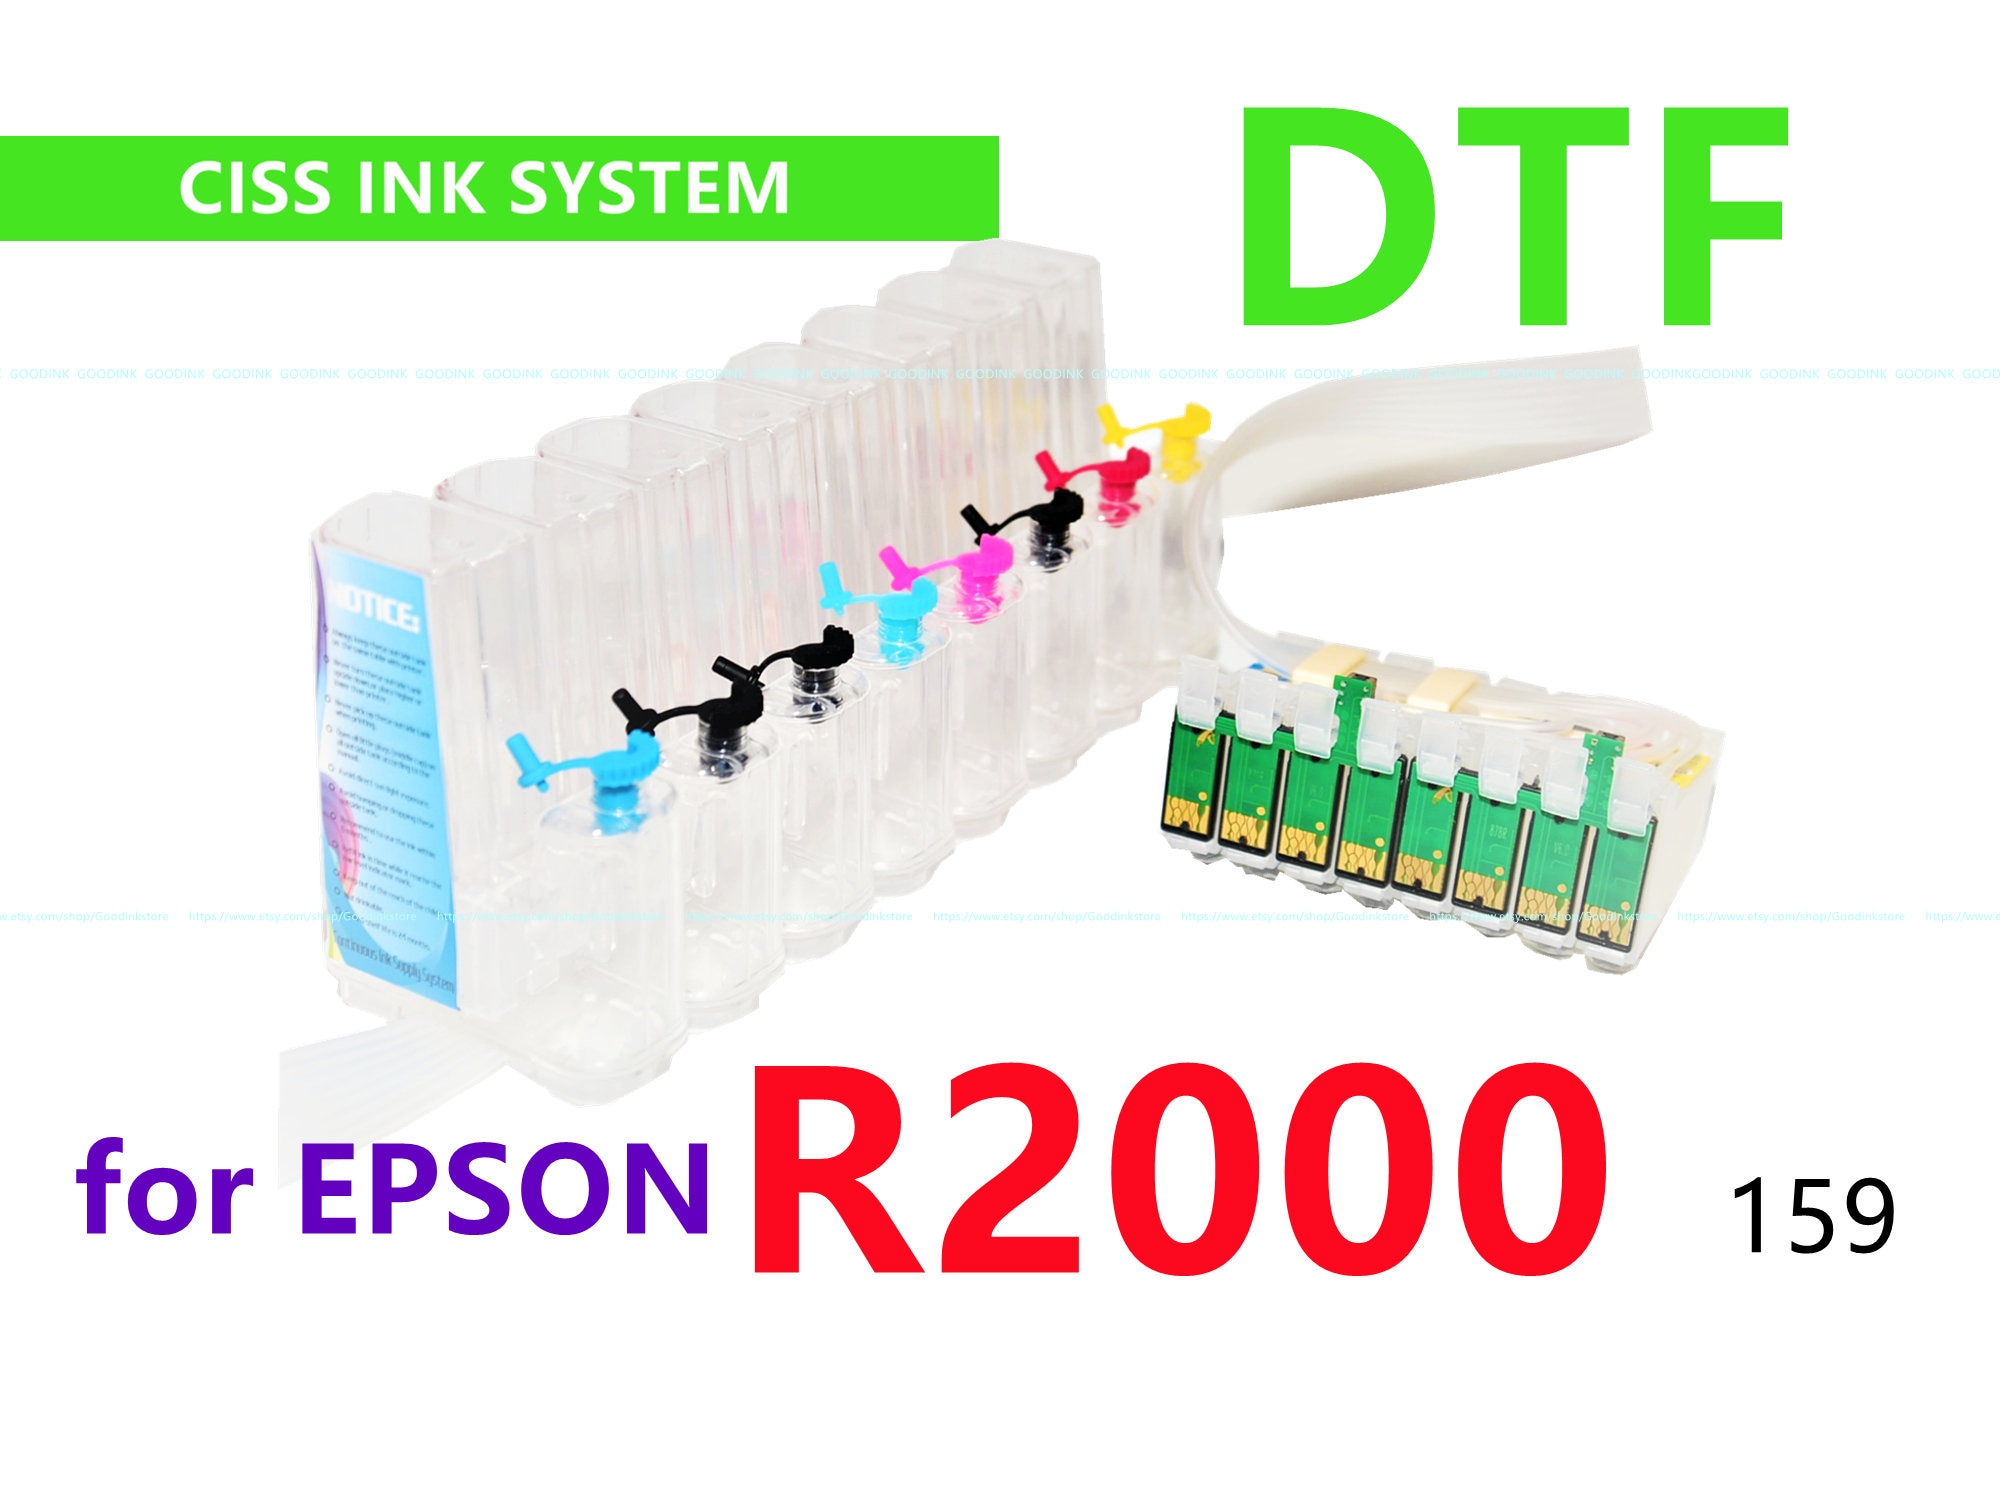 DTF White Ink Direct to Film Ink for DTF Printers-epson Printheads 